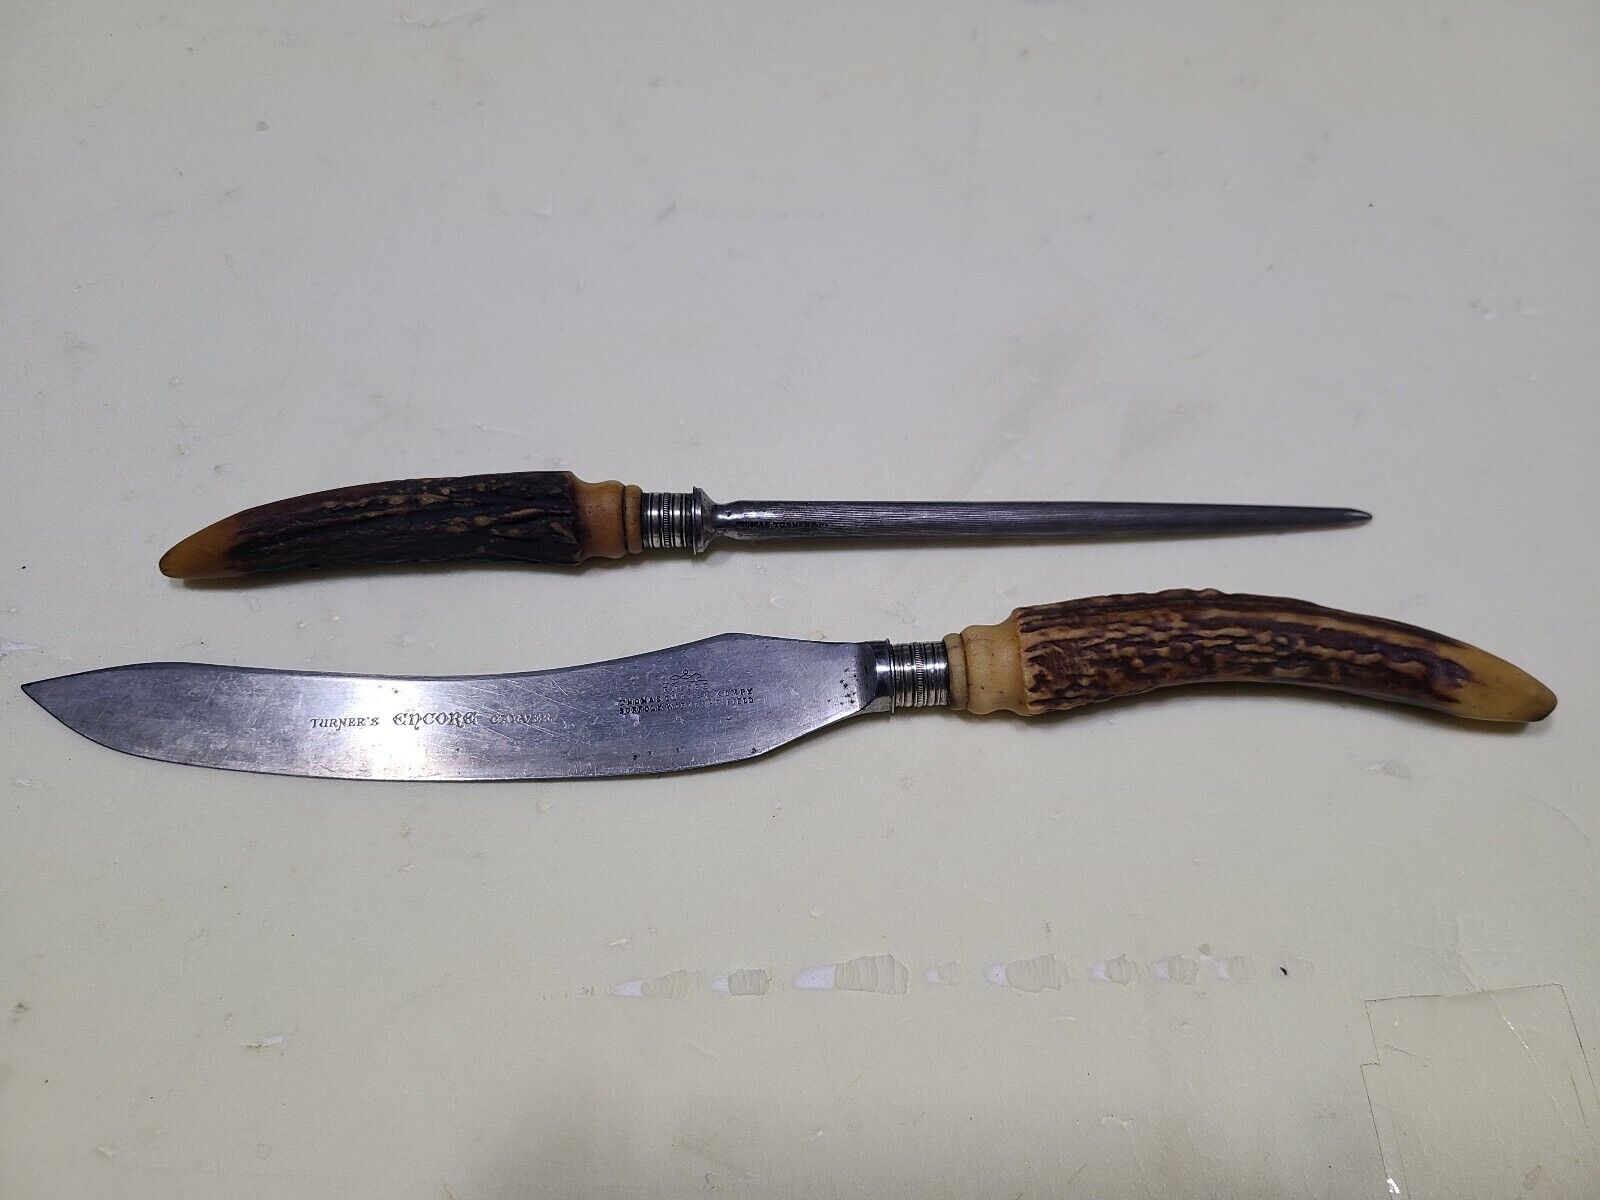 Thomas Turner Horn Carving Knife and Sheffield Steel